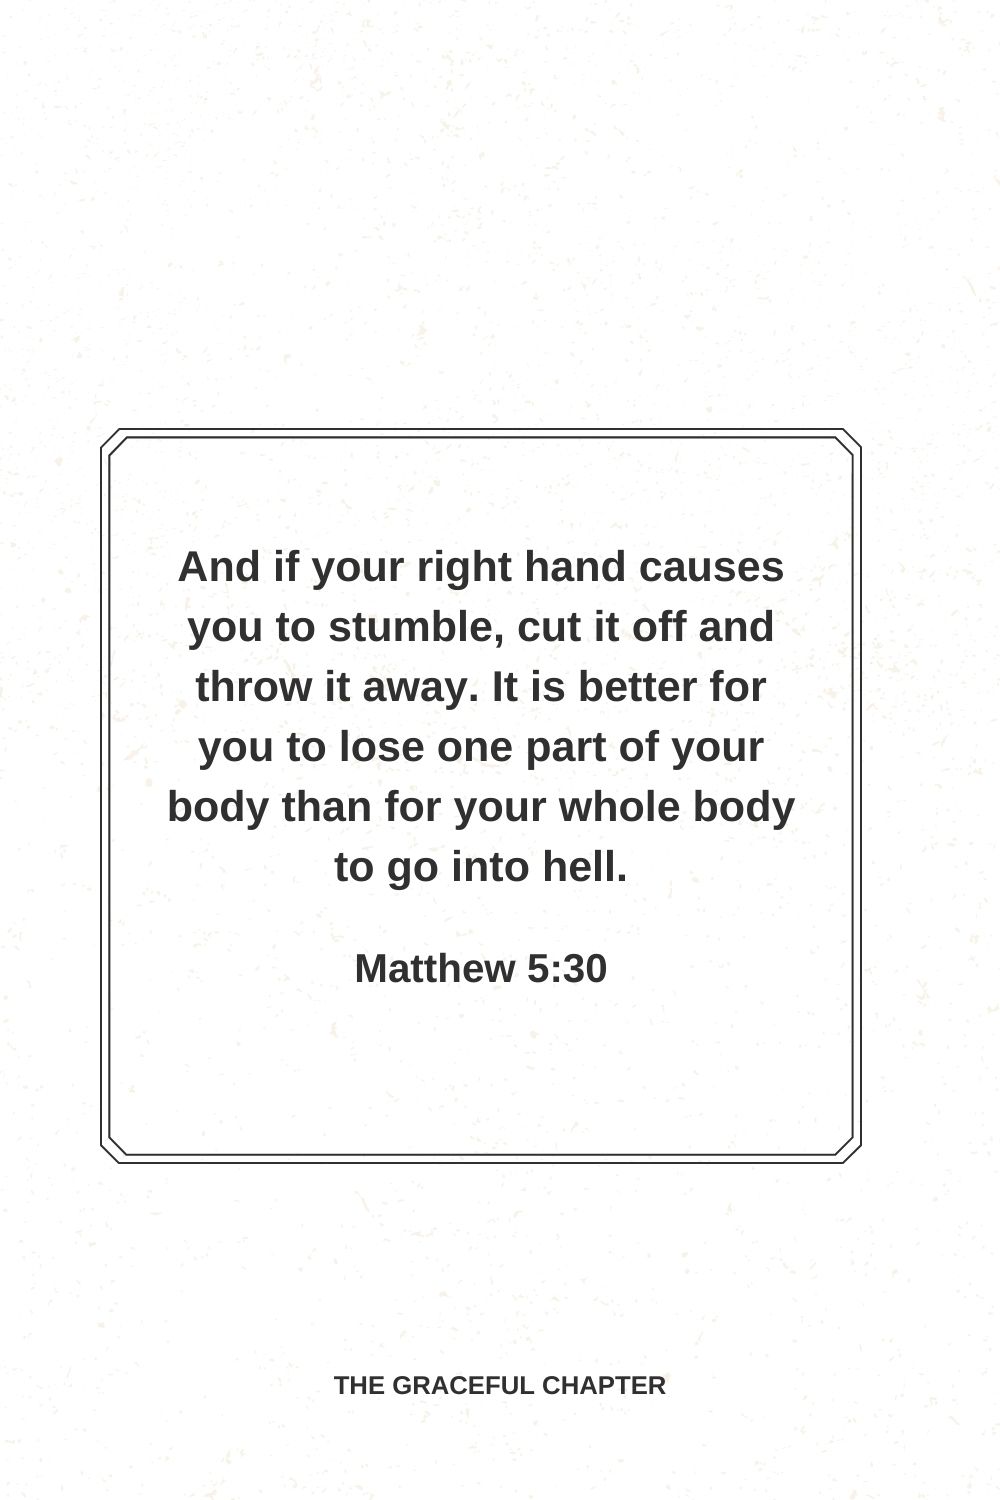 And if your right hand causes you to stumble, cut it off and throw it away. It is better for you to lose one part of your body than for your whole body to go into hell. Matthew 5:30